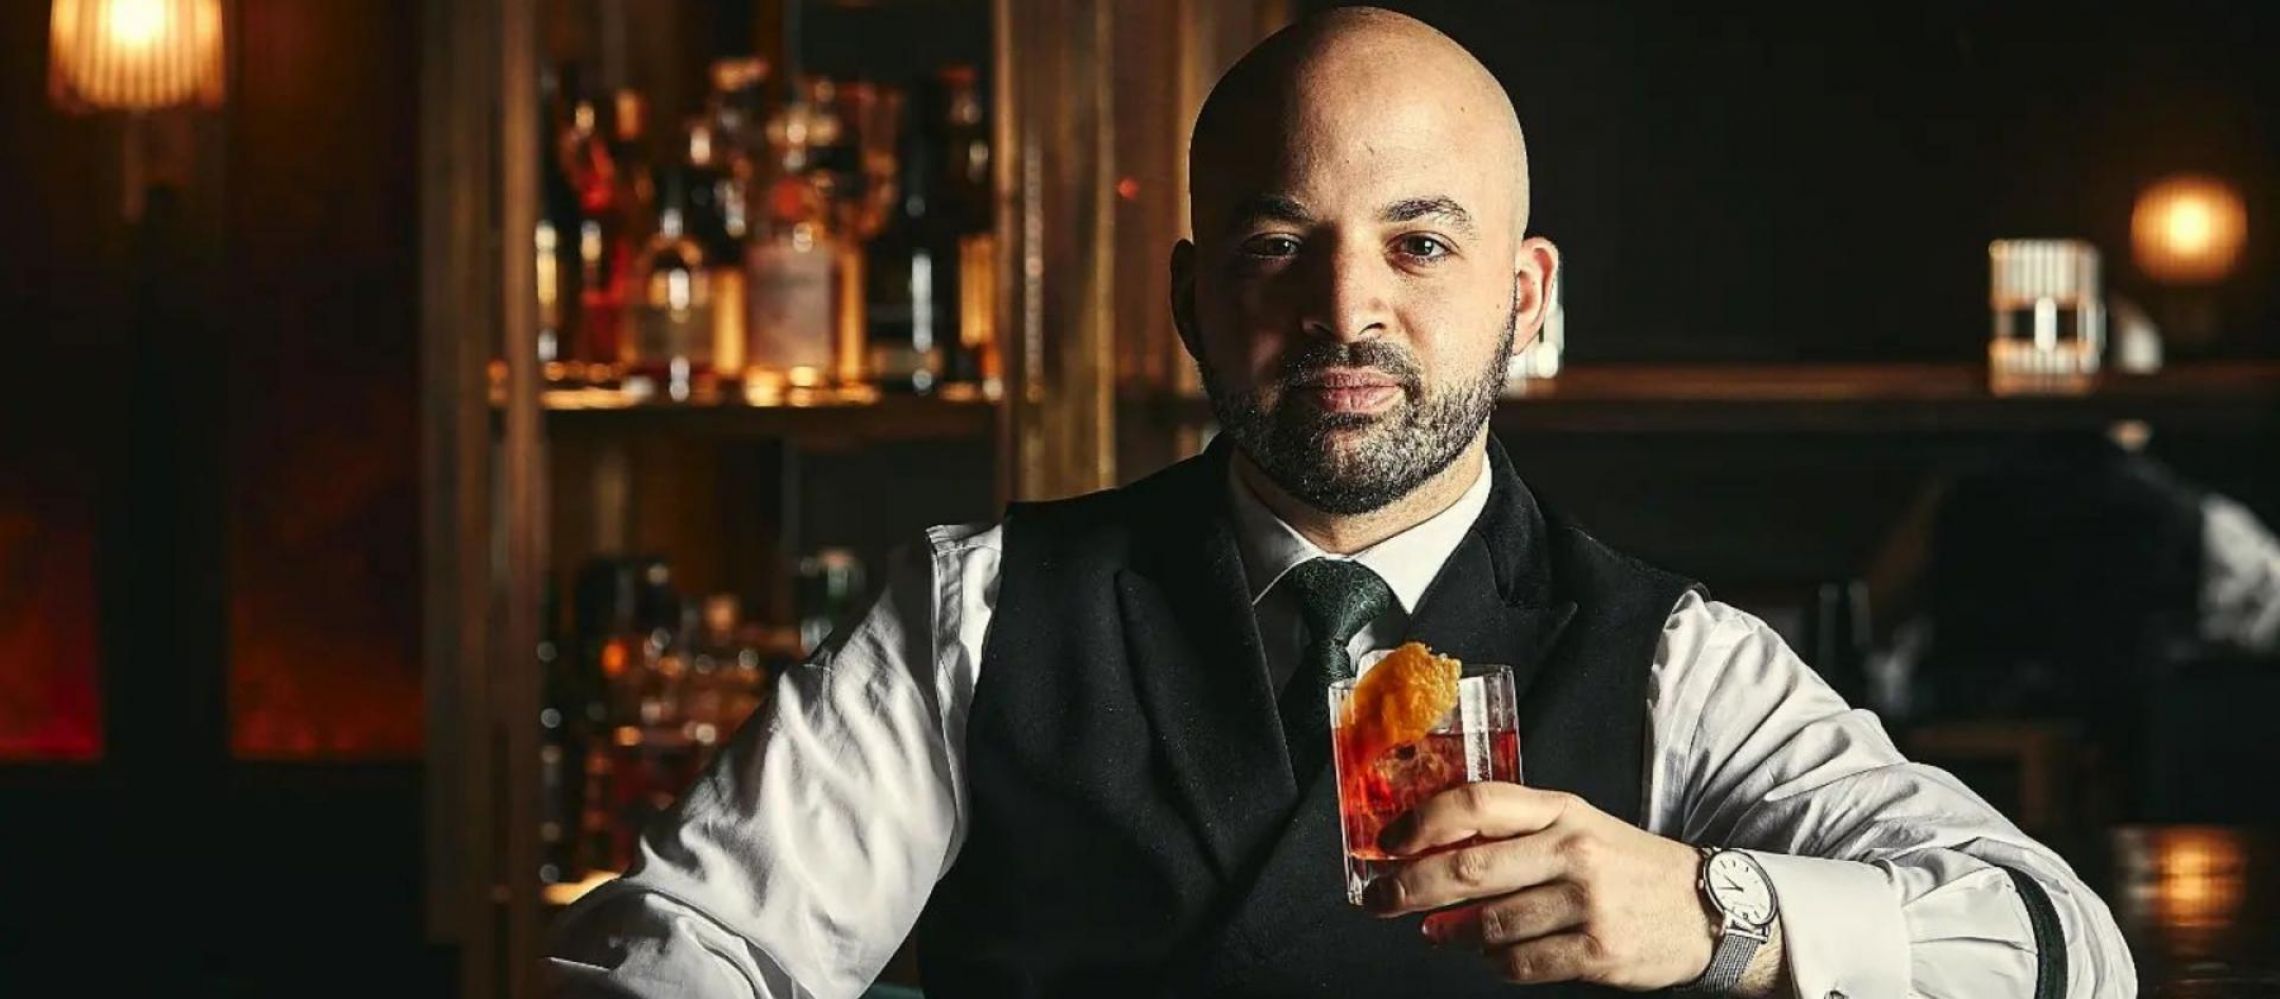 Photo for: Simplicity is the secret to grow beverage sales says Angelo Sparvoli, Head Bartender, St. James Bar